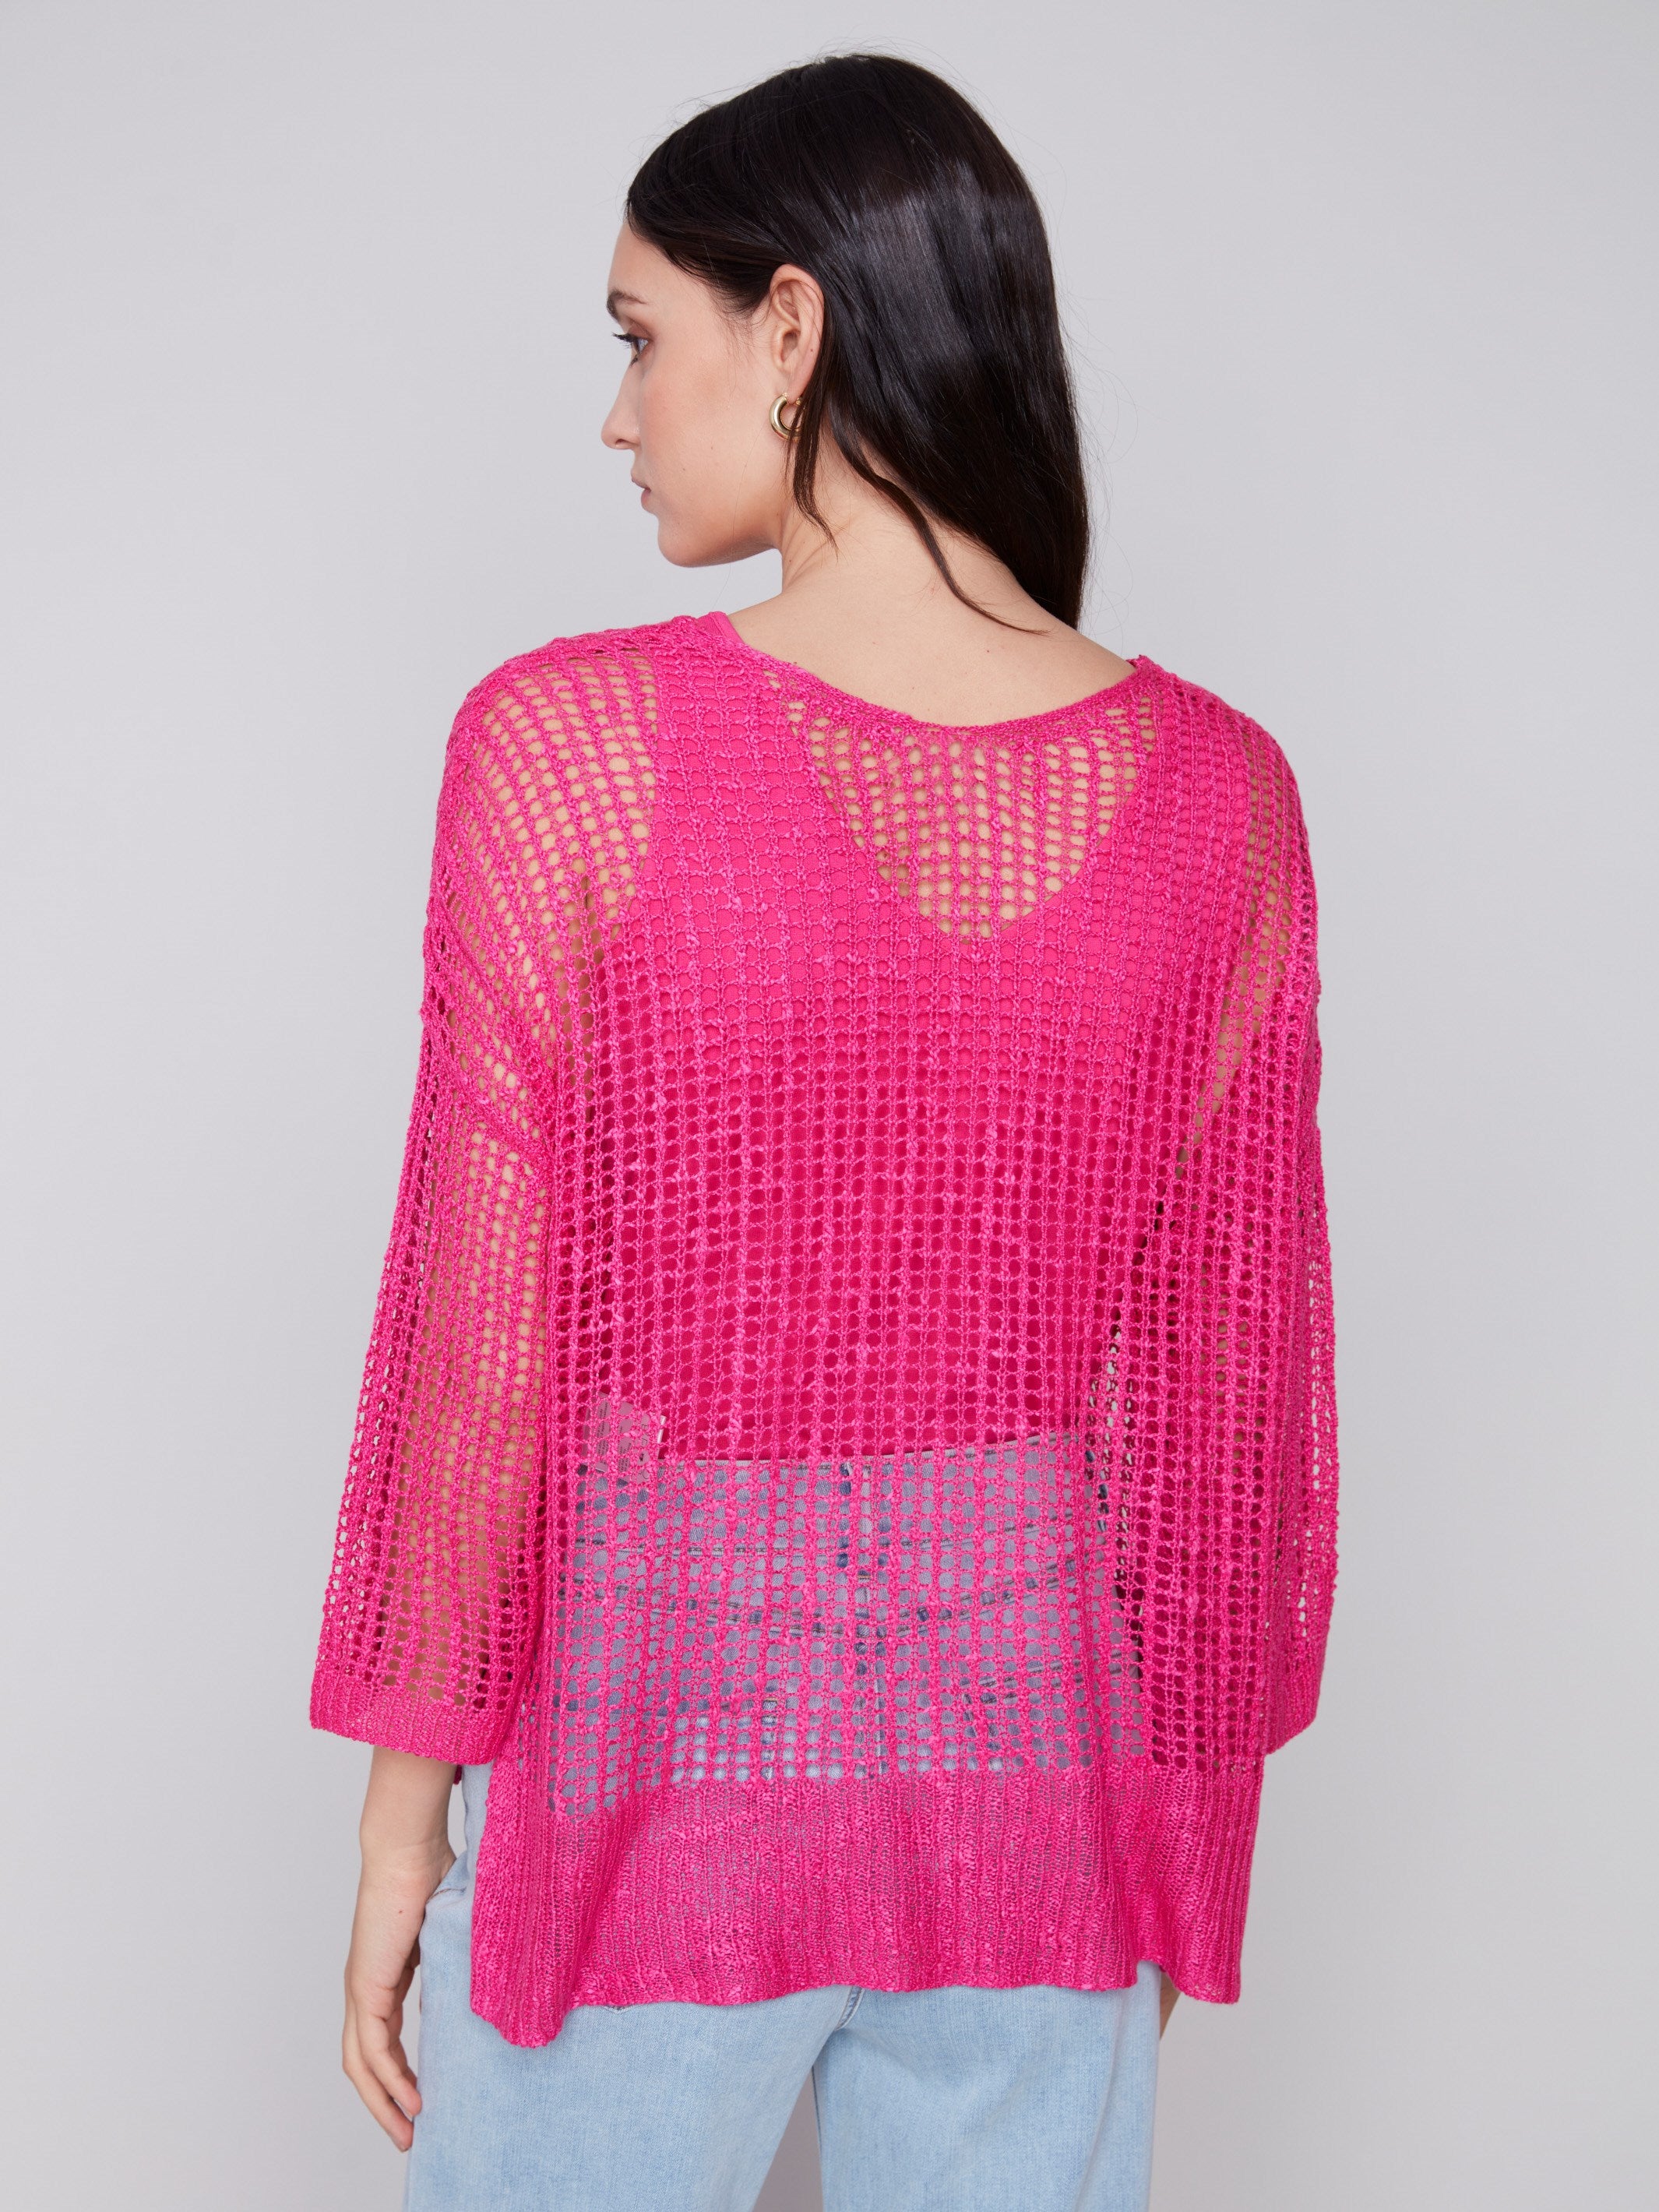 Fishnet Crochet Sweater - Punch - Charlie B Collection Canada - Image 2